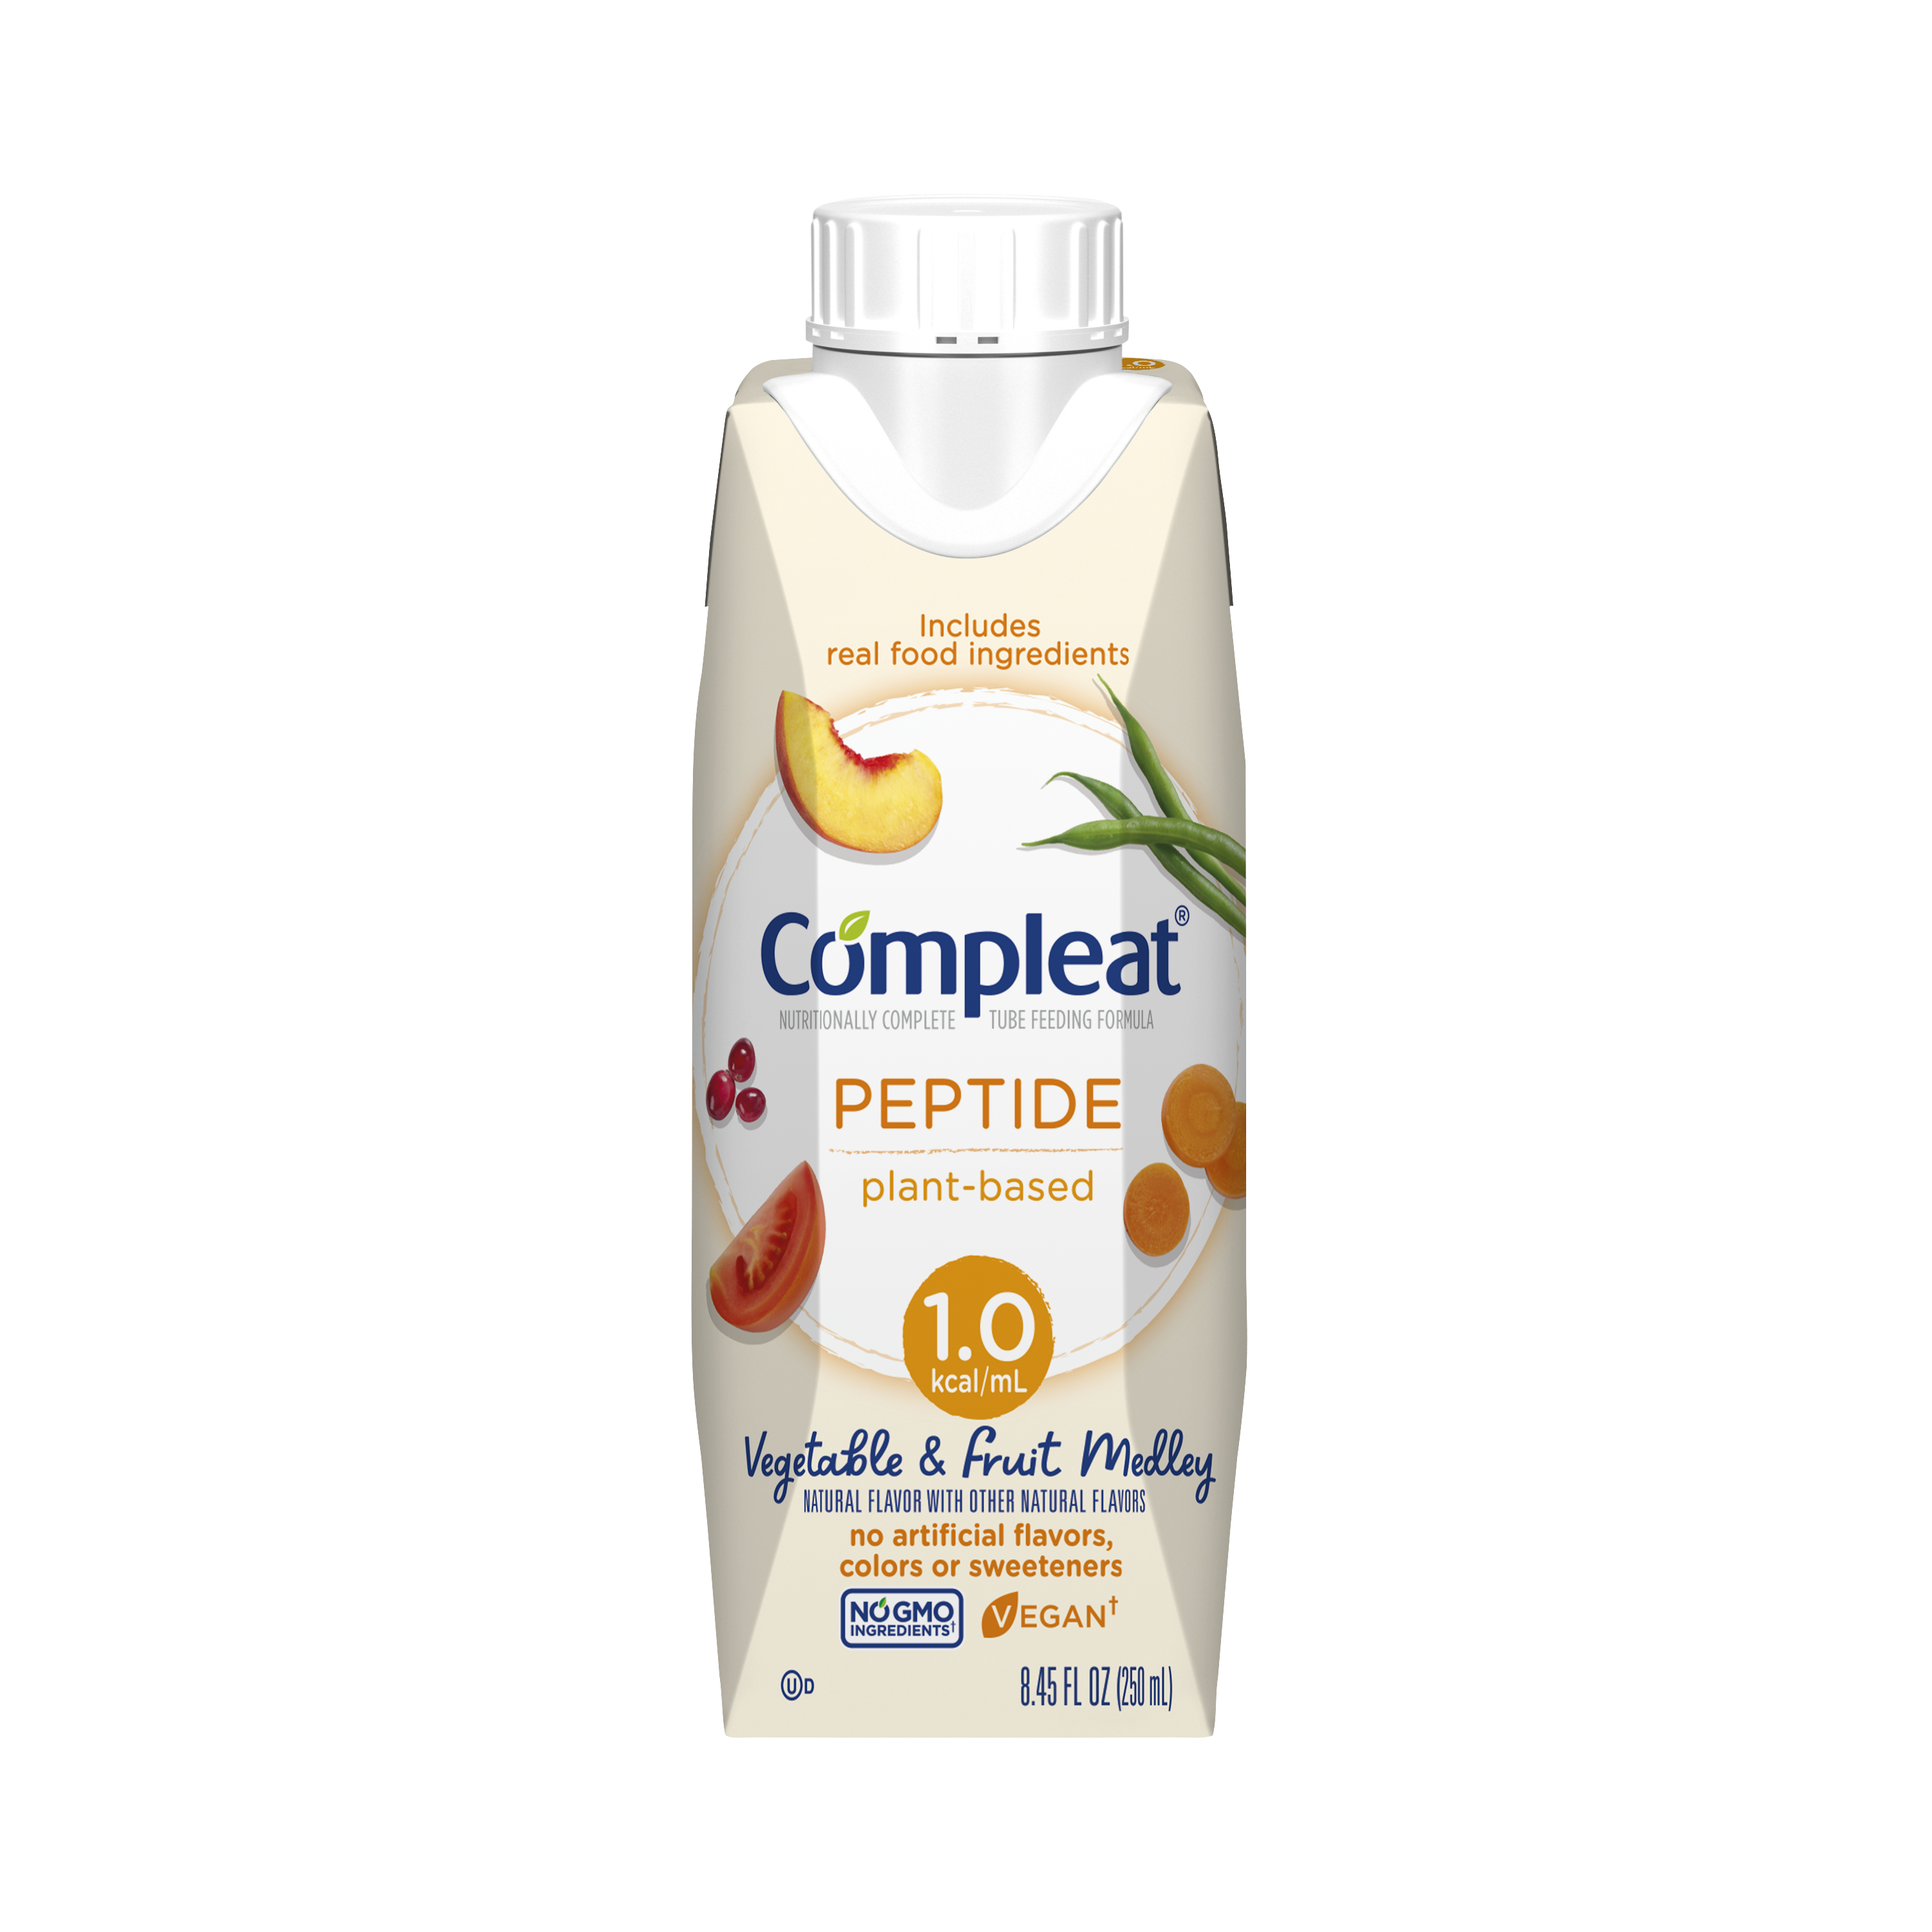 Compleat® Peptide 1.0